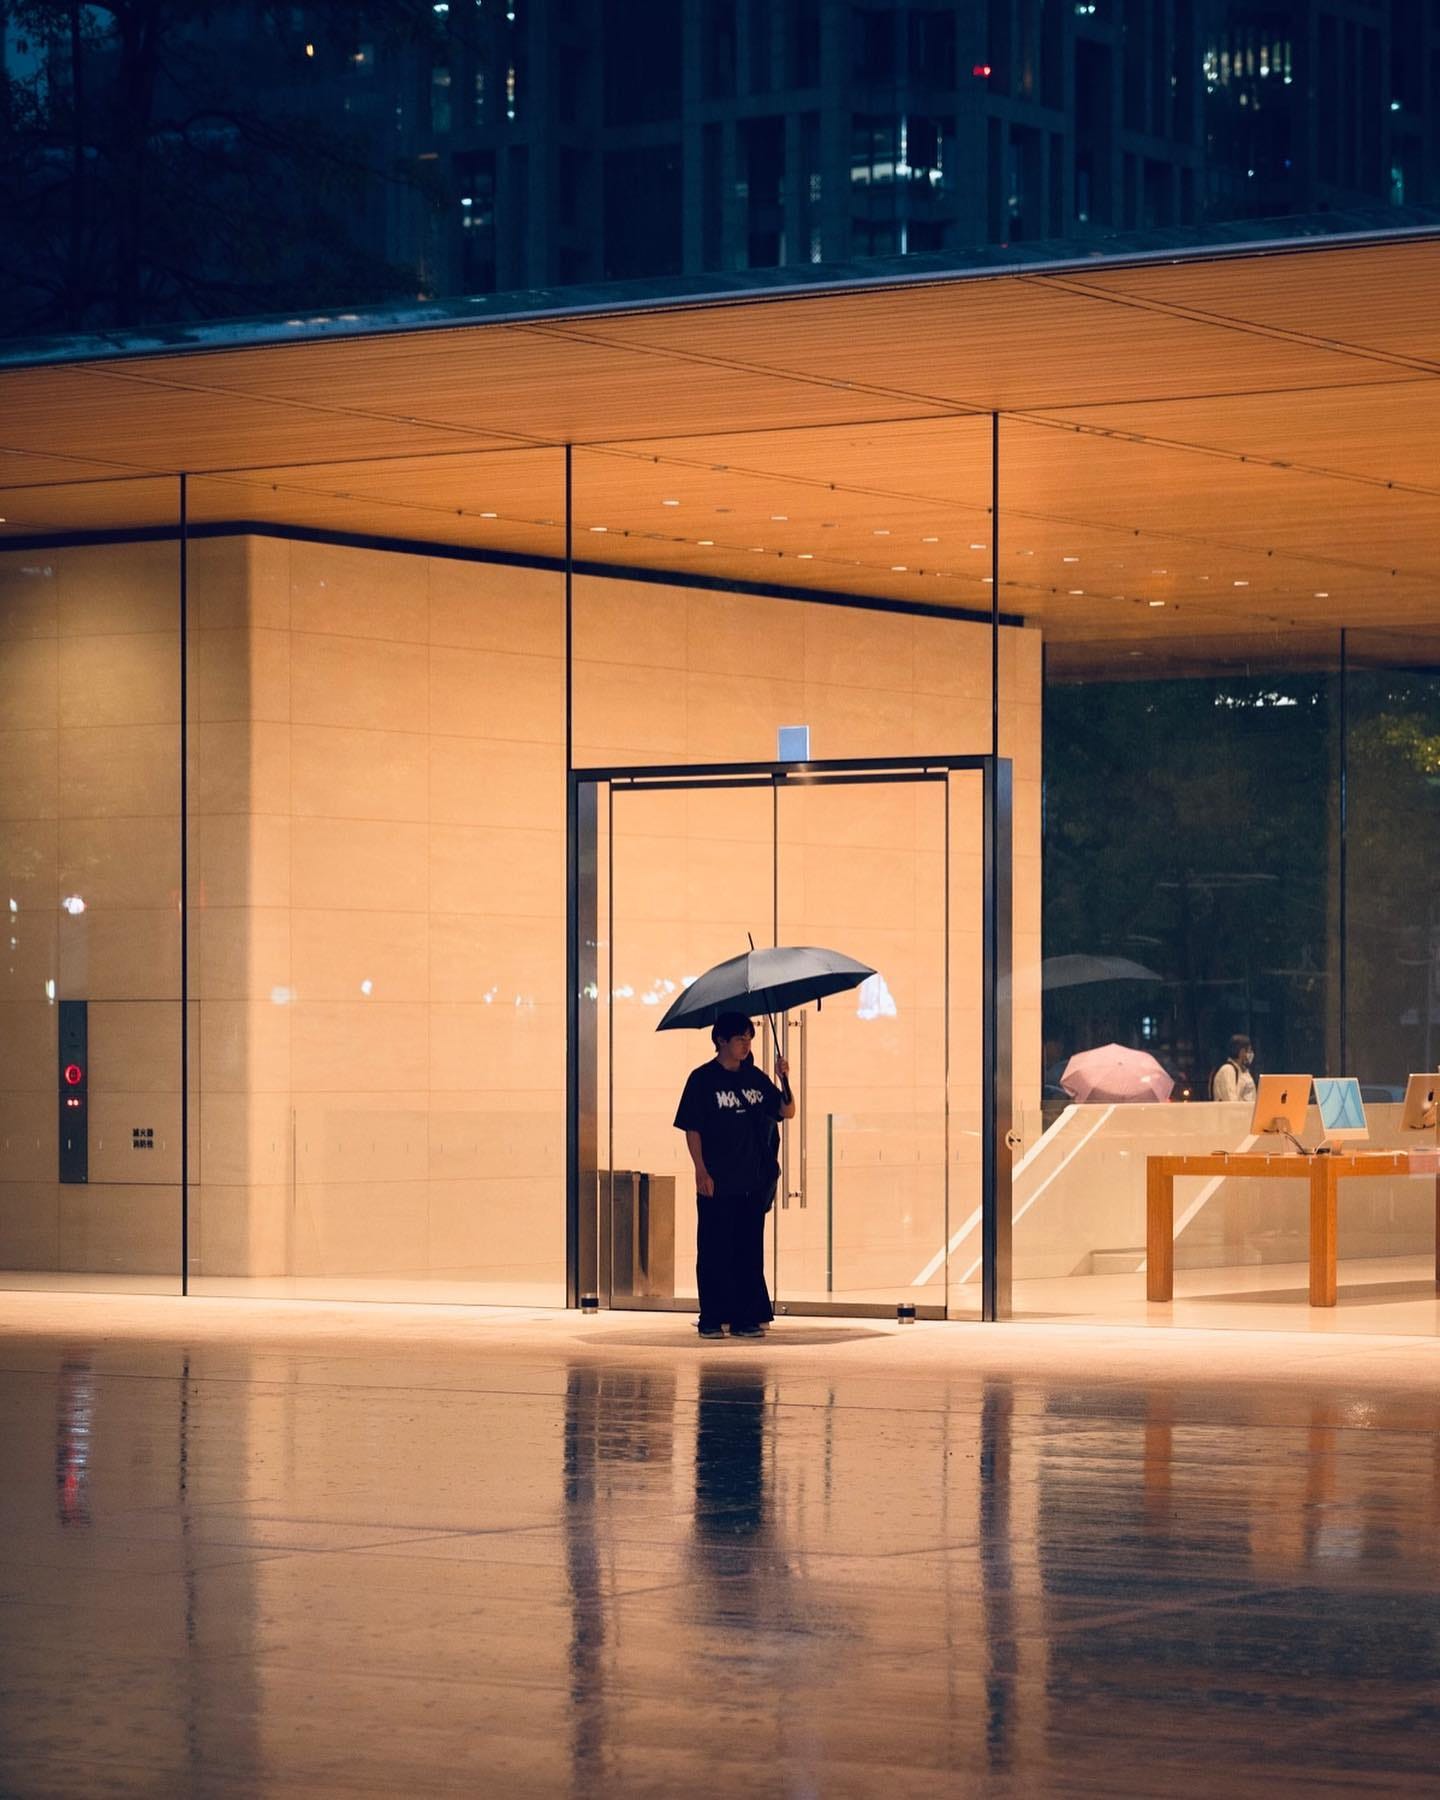 A person with an umbrella stands outside the entrance to Apple Xinyi A13 after dark.